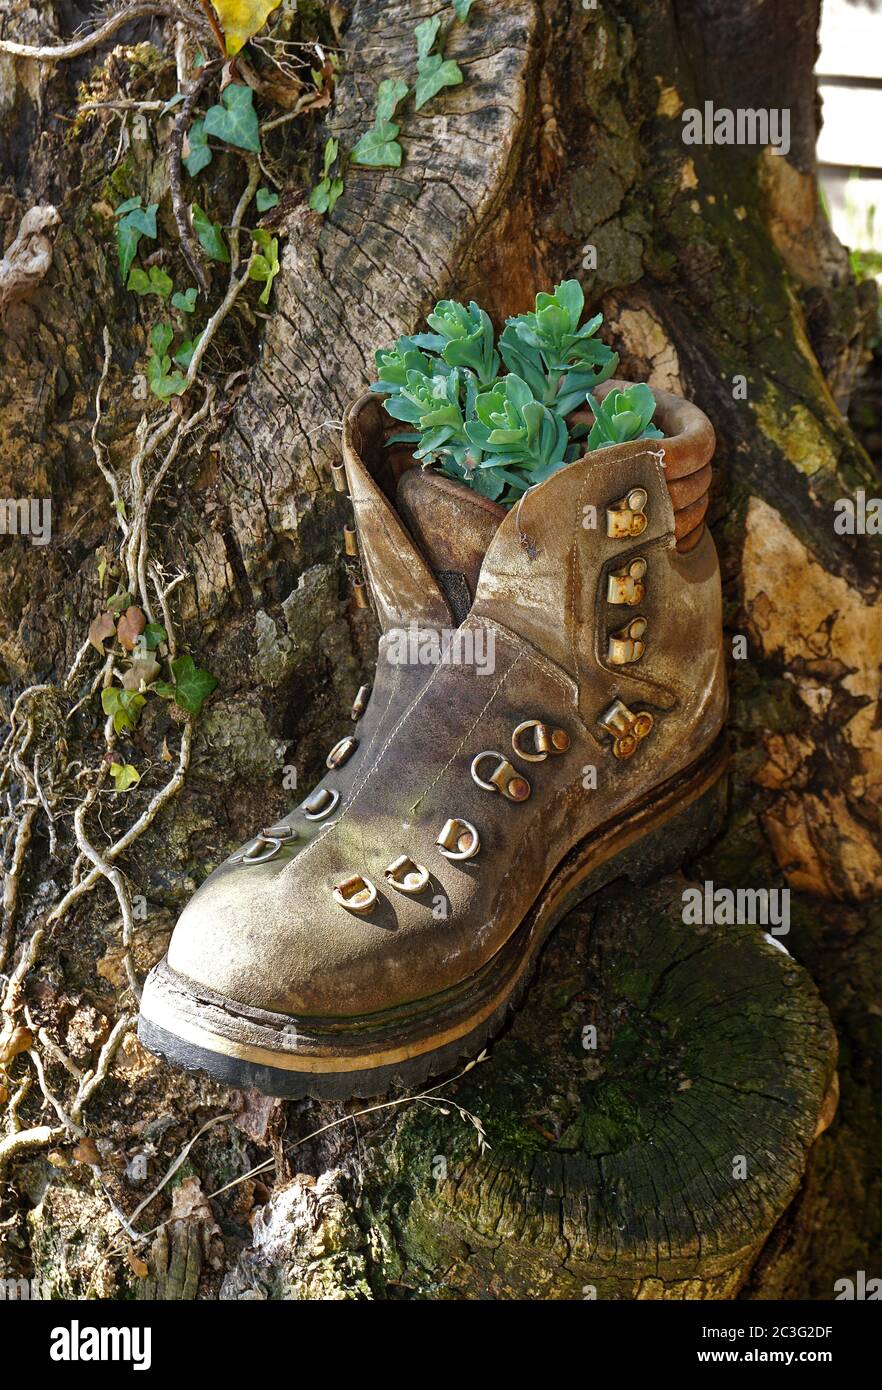 Hiking boots decorated with flowers Stock Photo